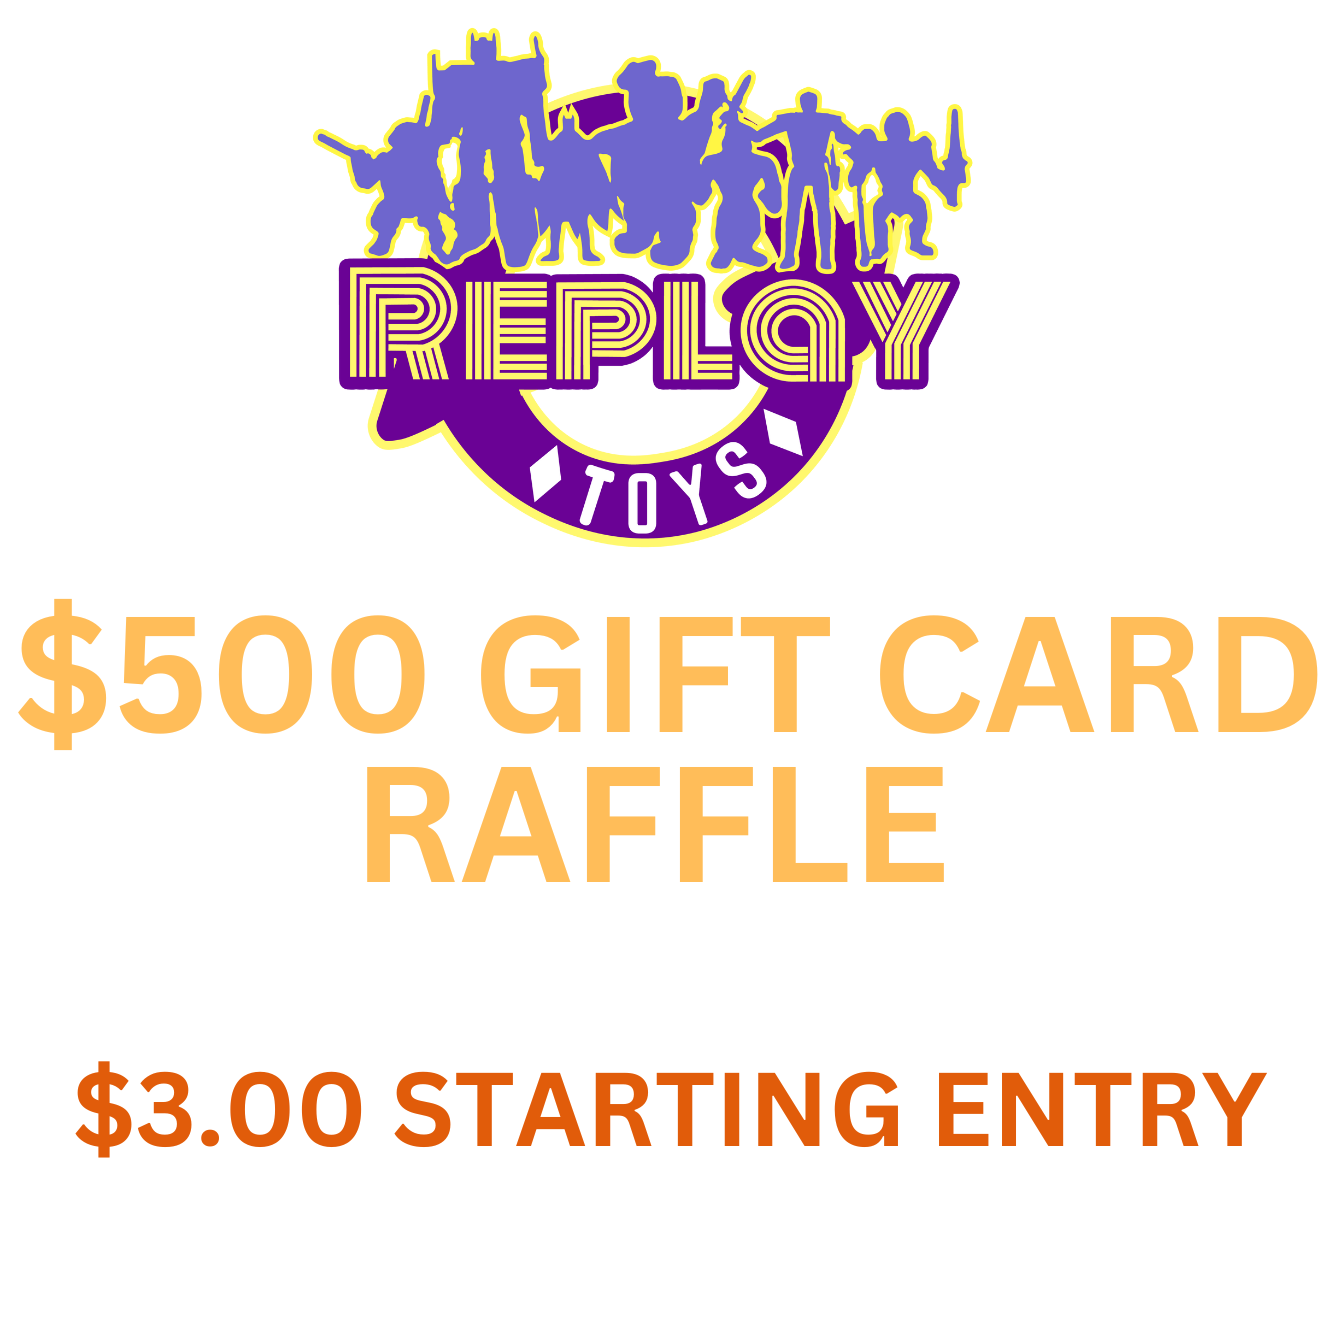 $500 Gift Card Raffle ($3.00 Starting Entry)